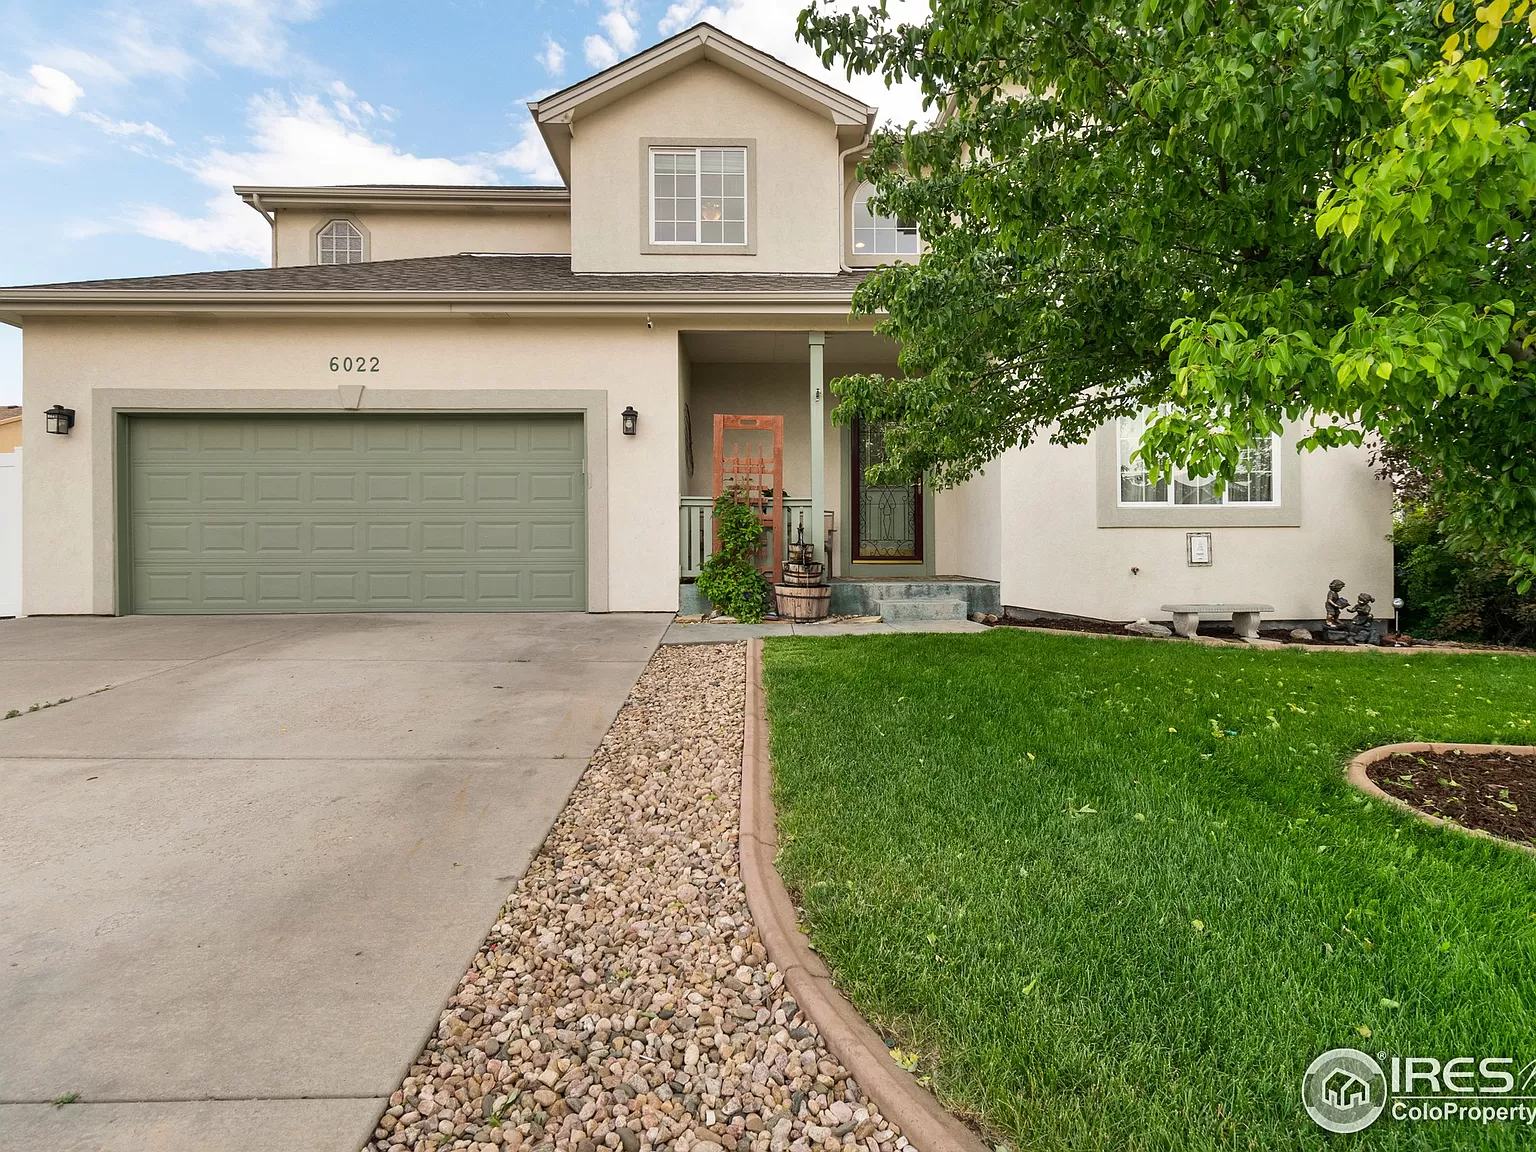 6022 W A St, Greeley, CO 80634 | Zillow